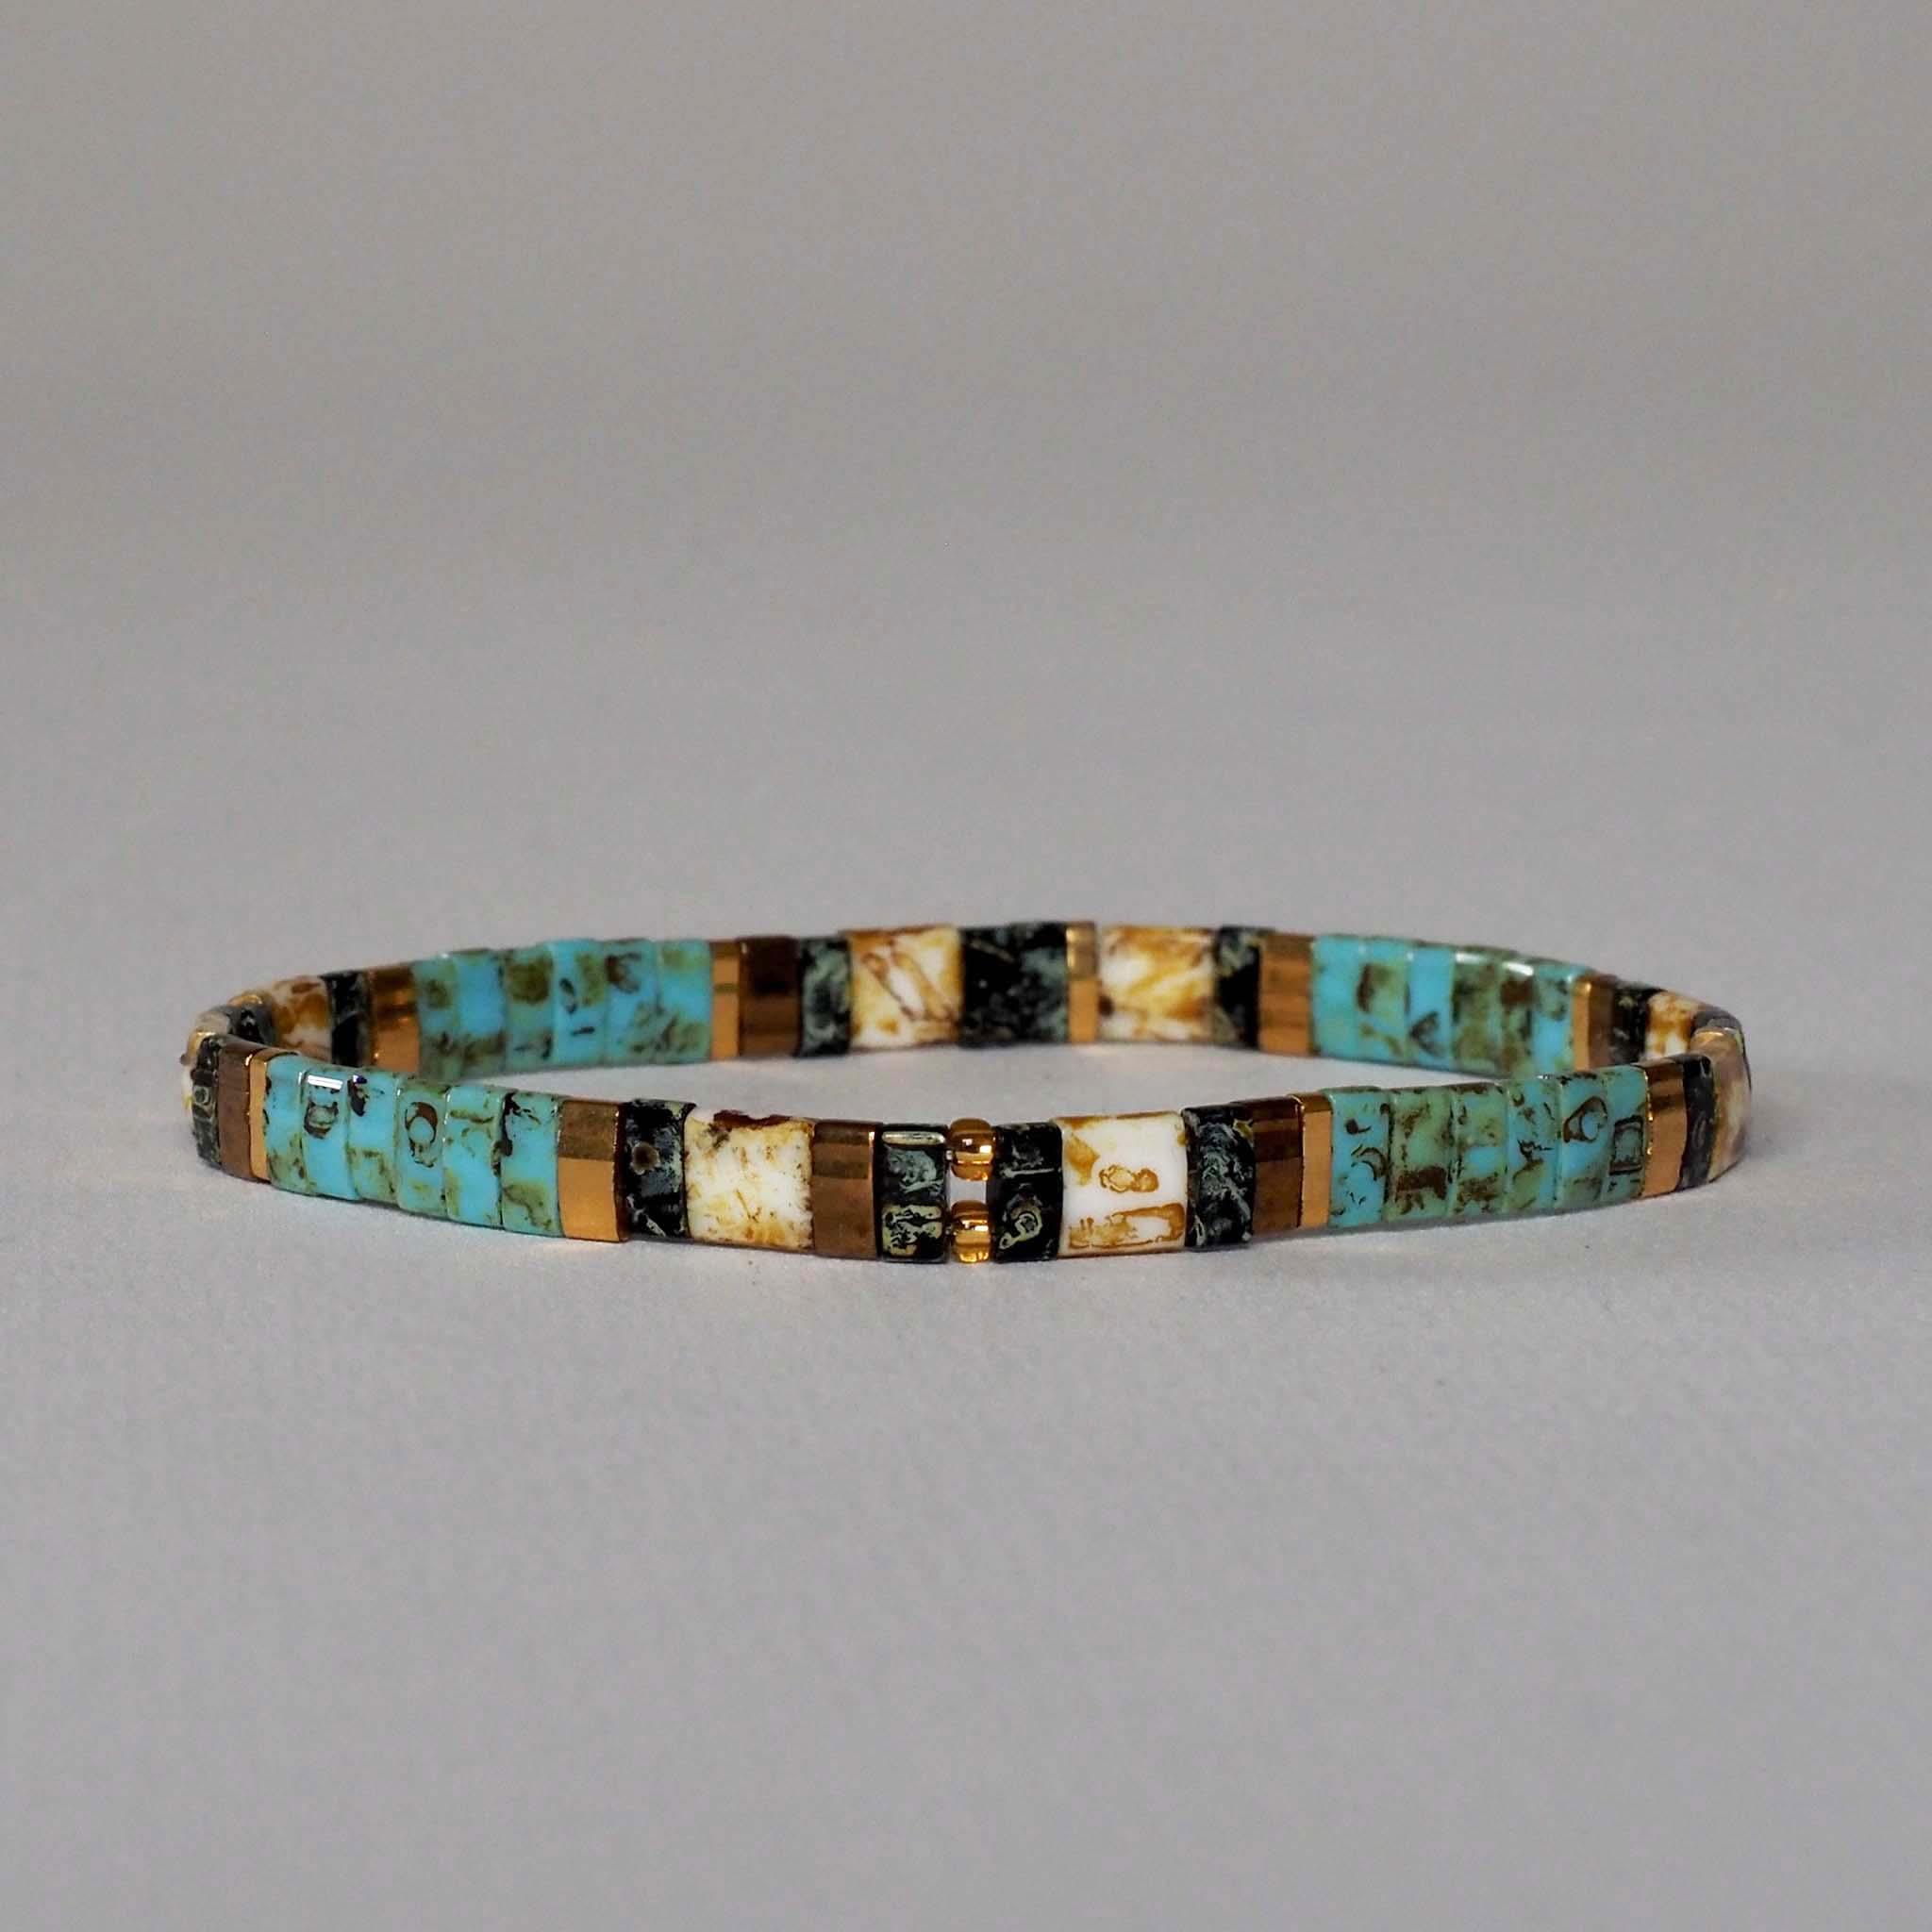 Miyuki Glass Bead bracelet, detailing turquoise mottled design with gold and black and set against a plain background